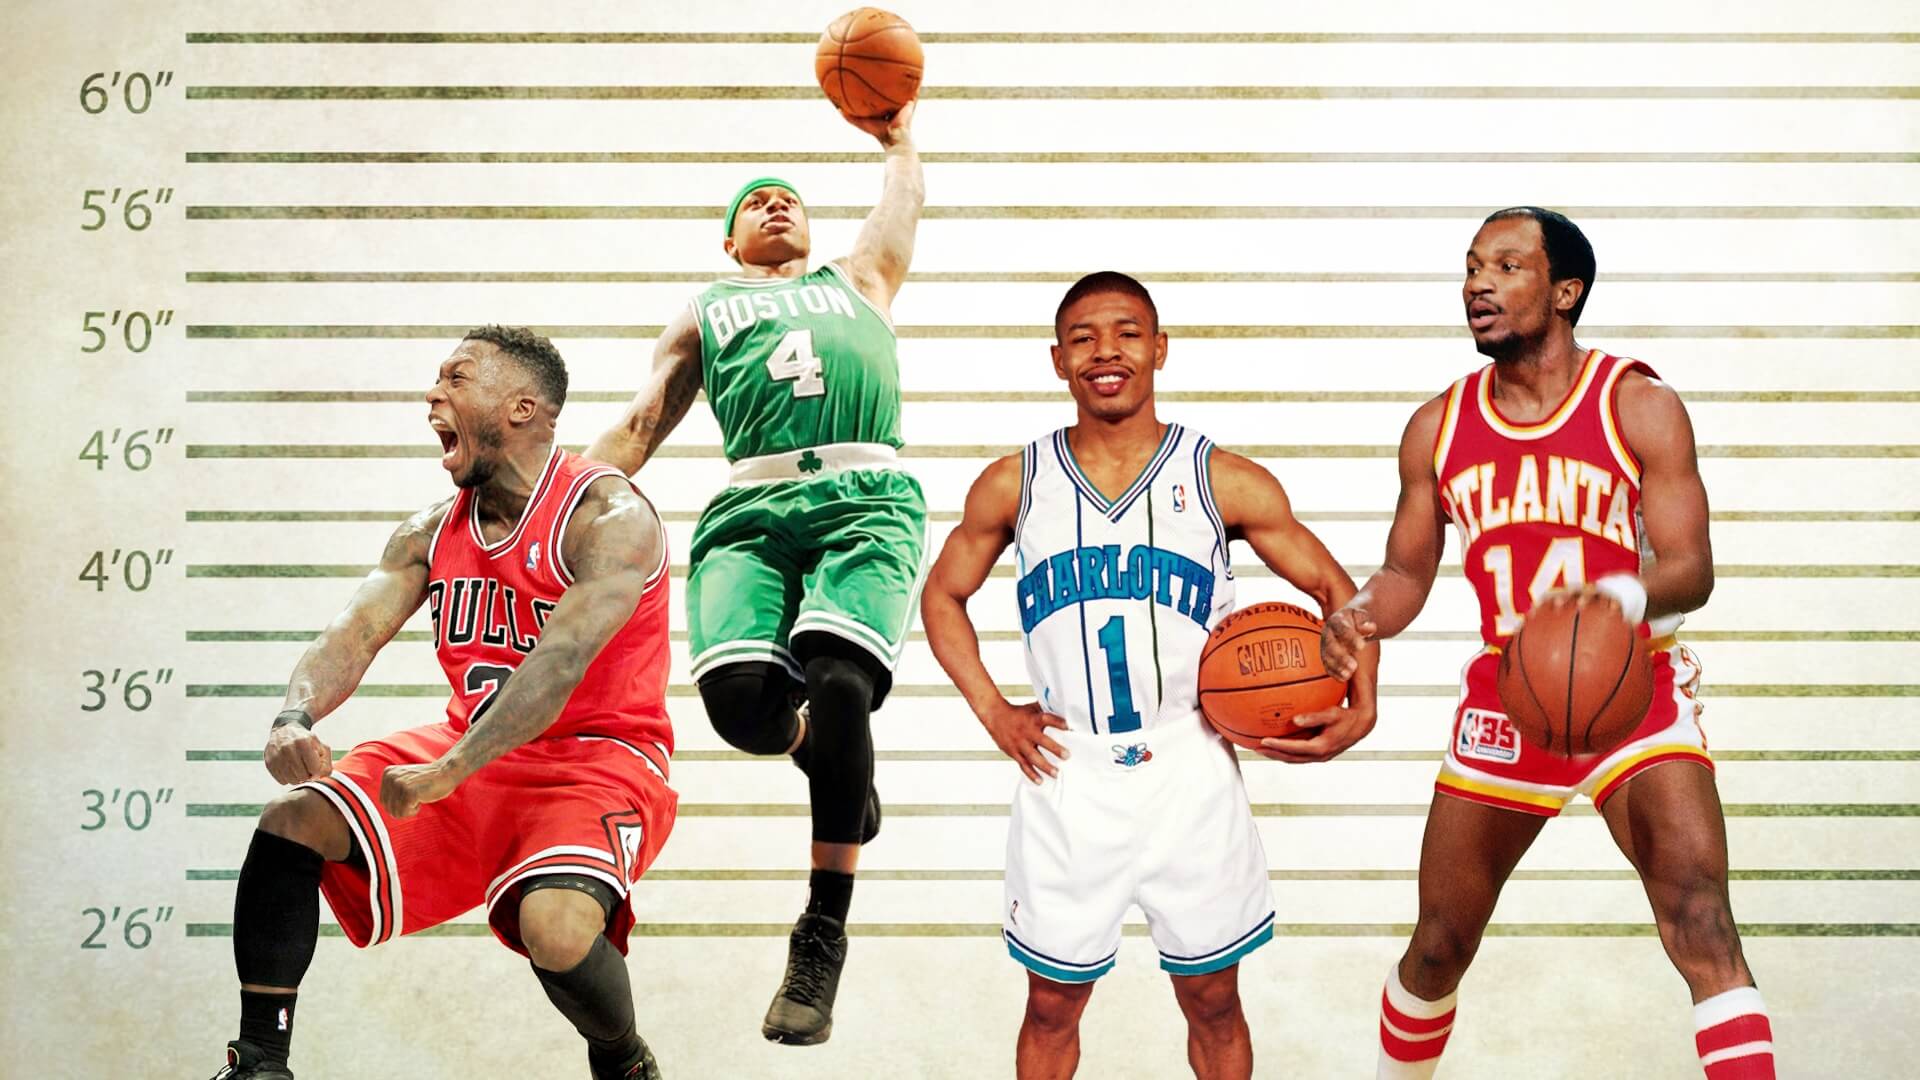 Nate Robinson, Isaiah Thomas and more of the shortest players in NBA history